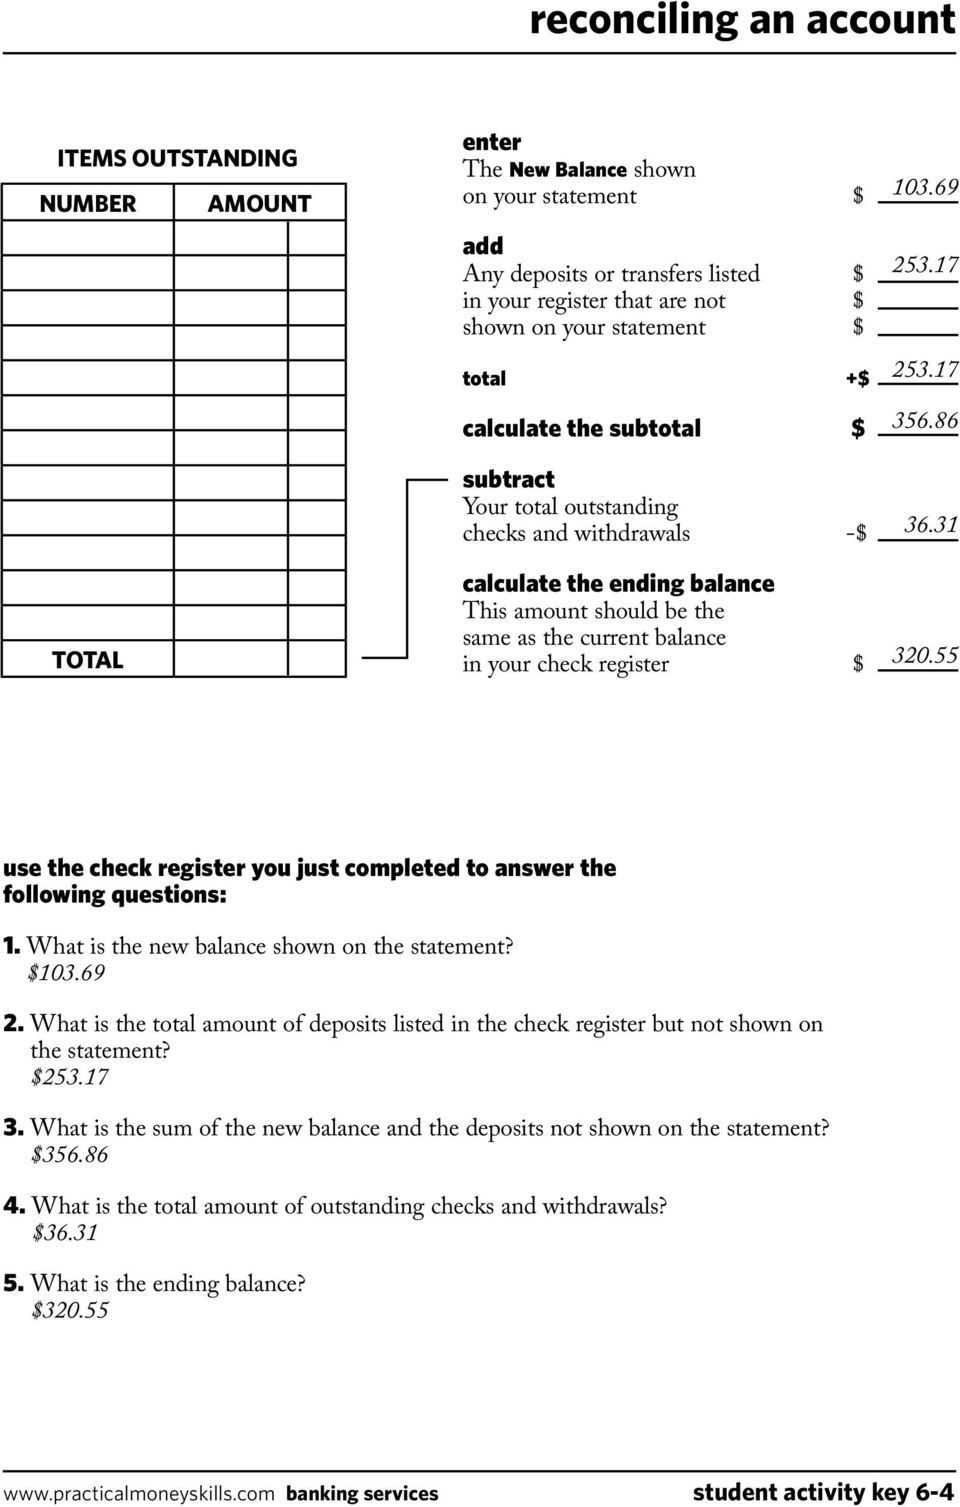 keeping a running balance answer key - PDF Free Download Intended For Checkbook Register Worksheet 1 Answers